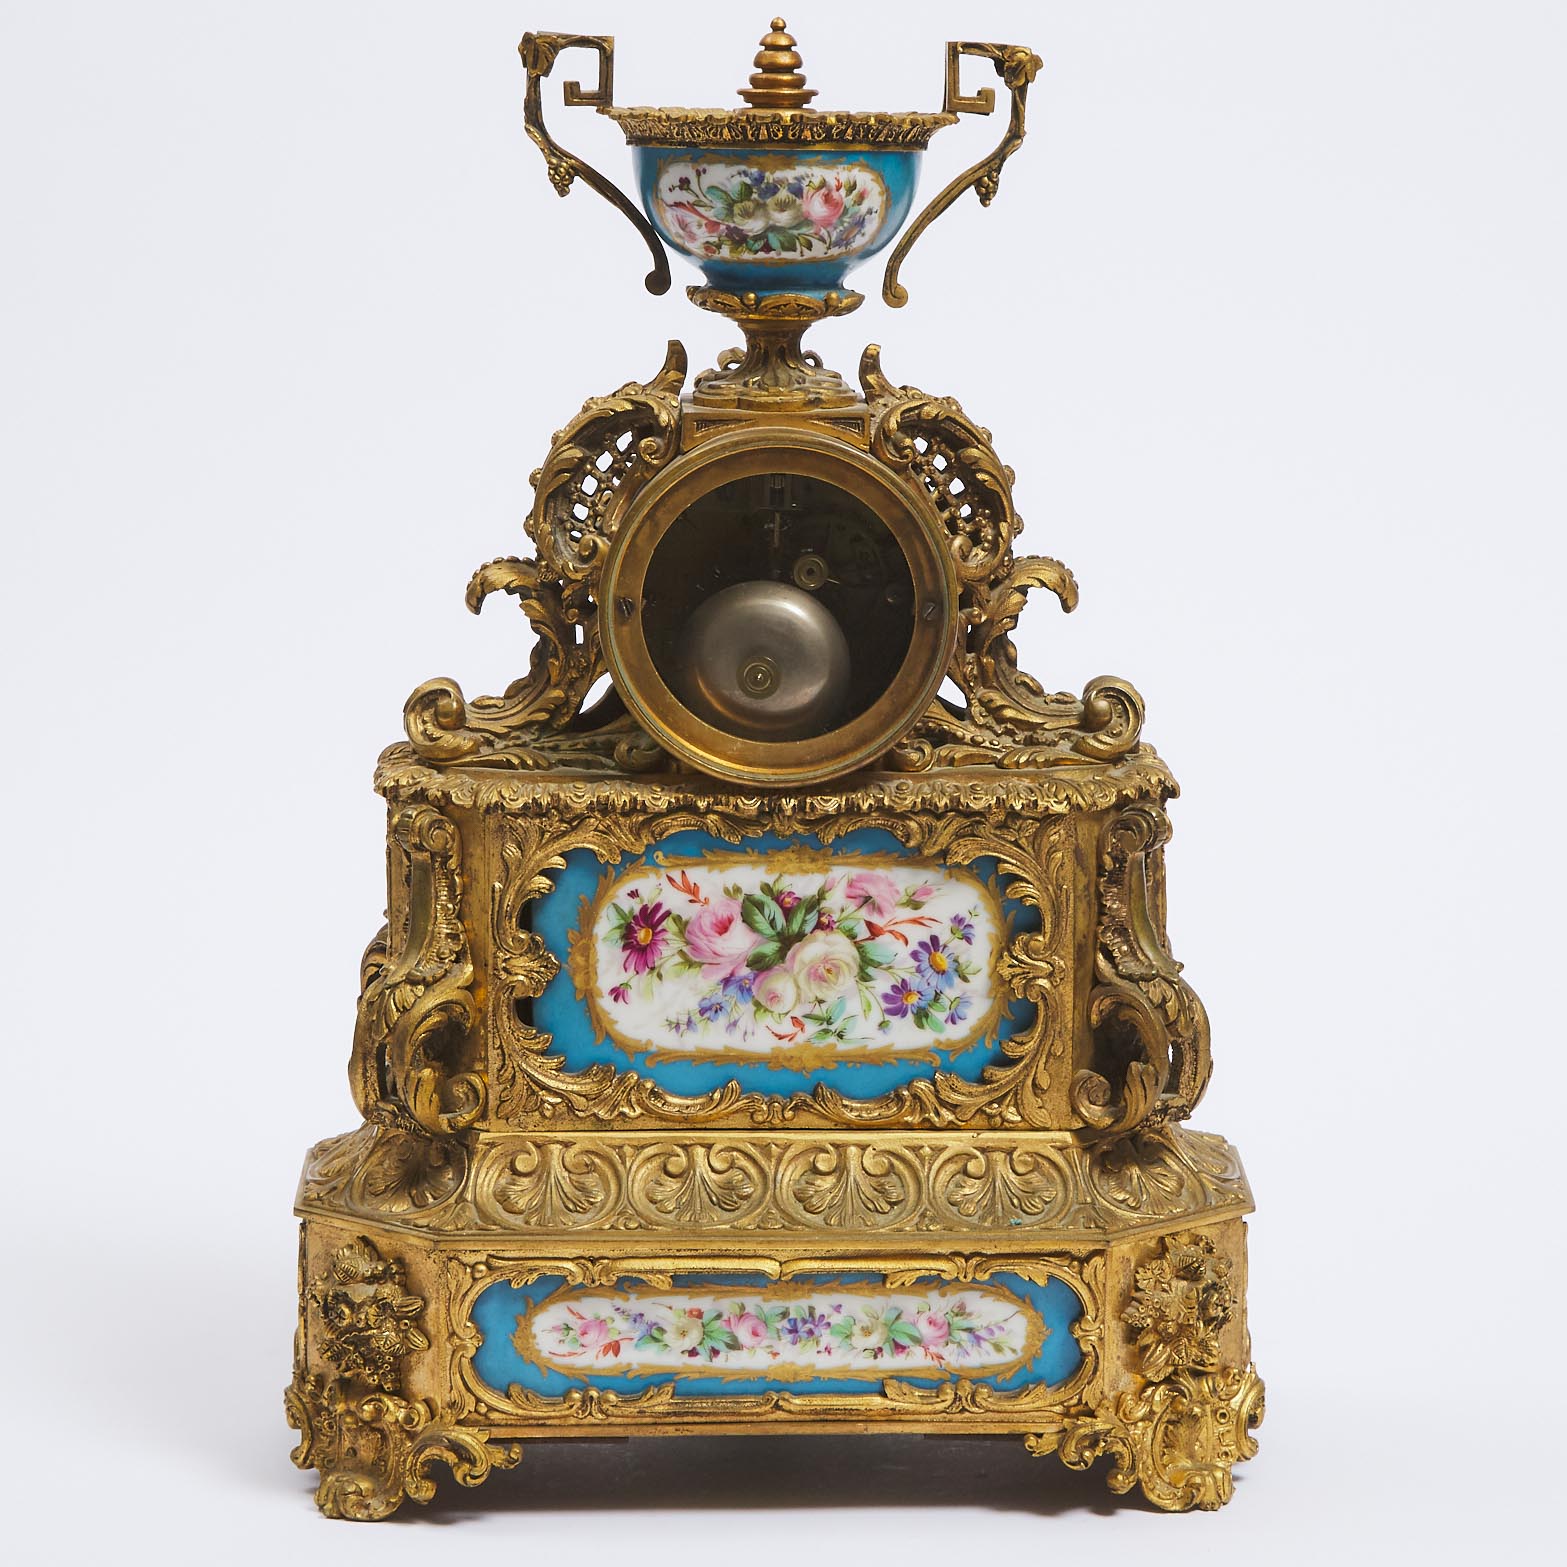 French 'Sèvres' Porcelain Mounted Ormolu Mantle Clock, mid 19th century